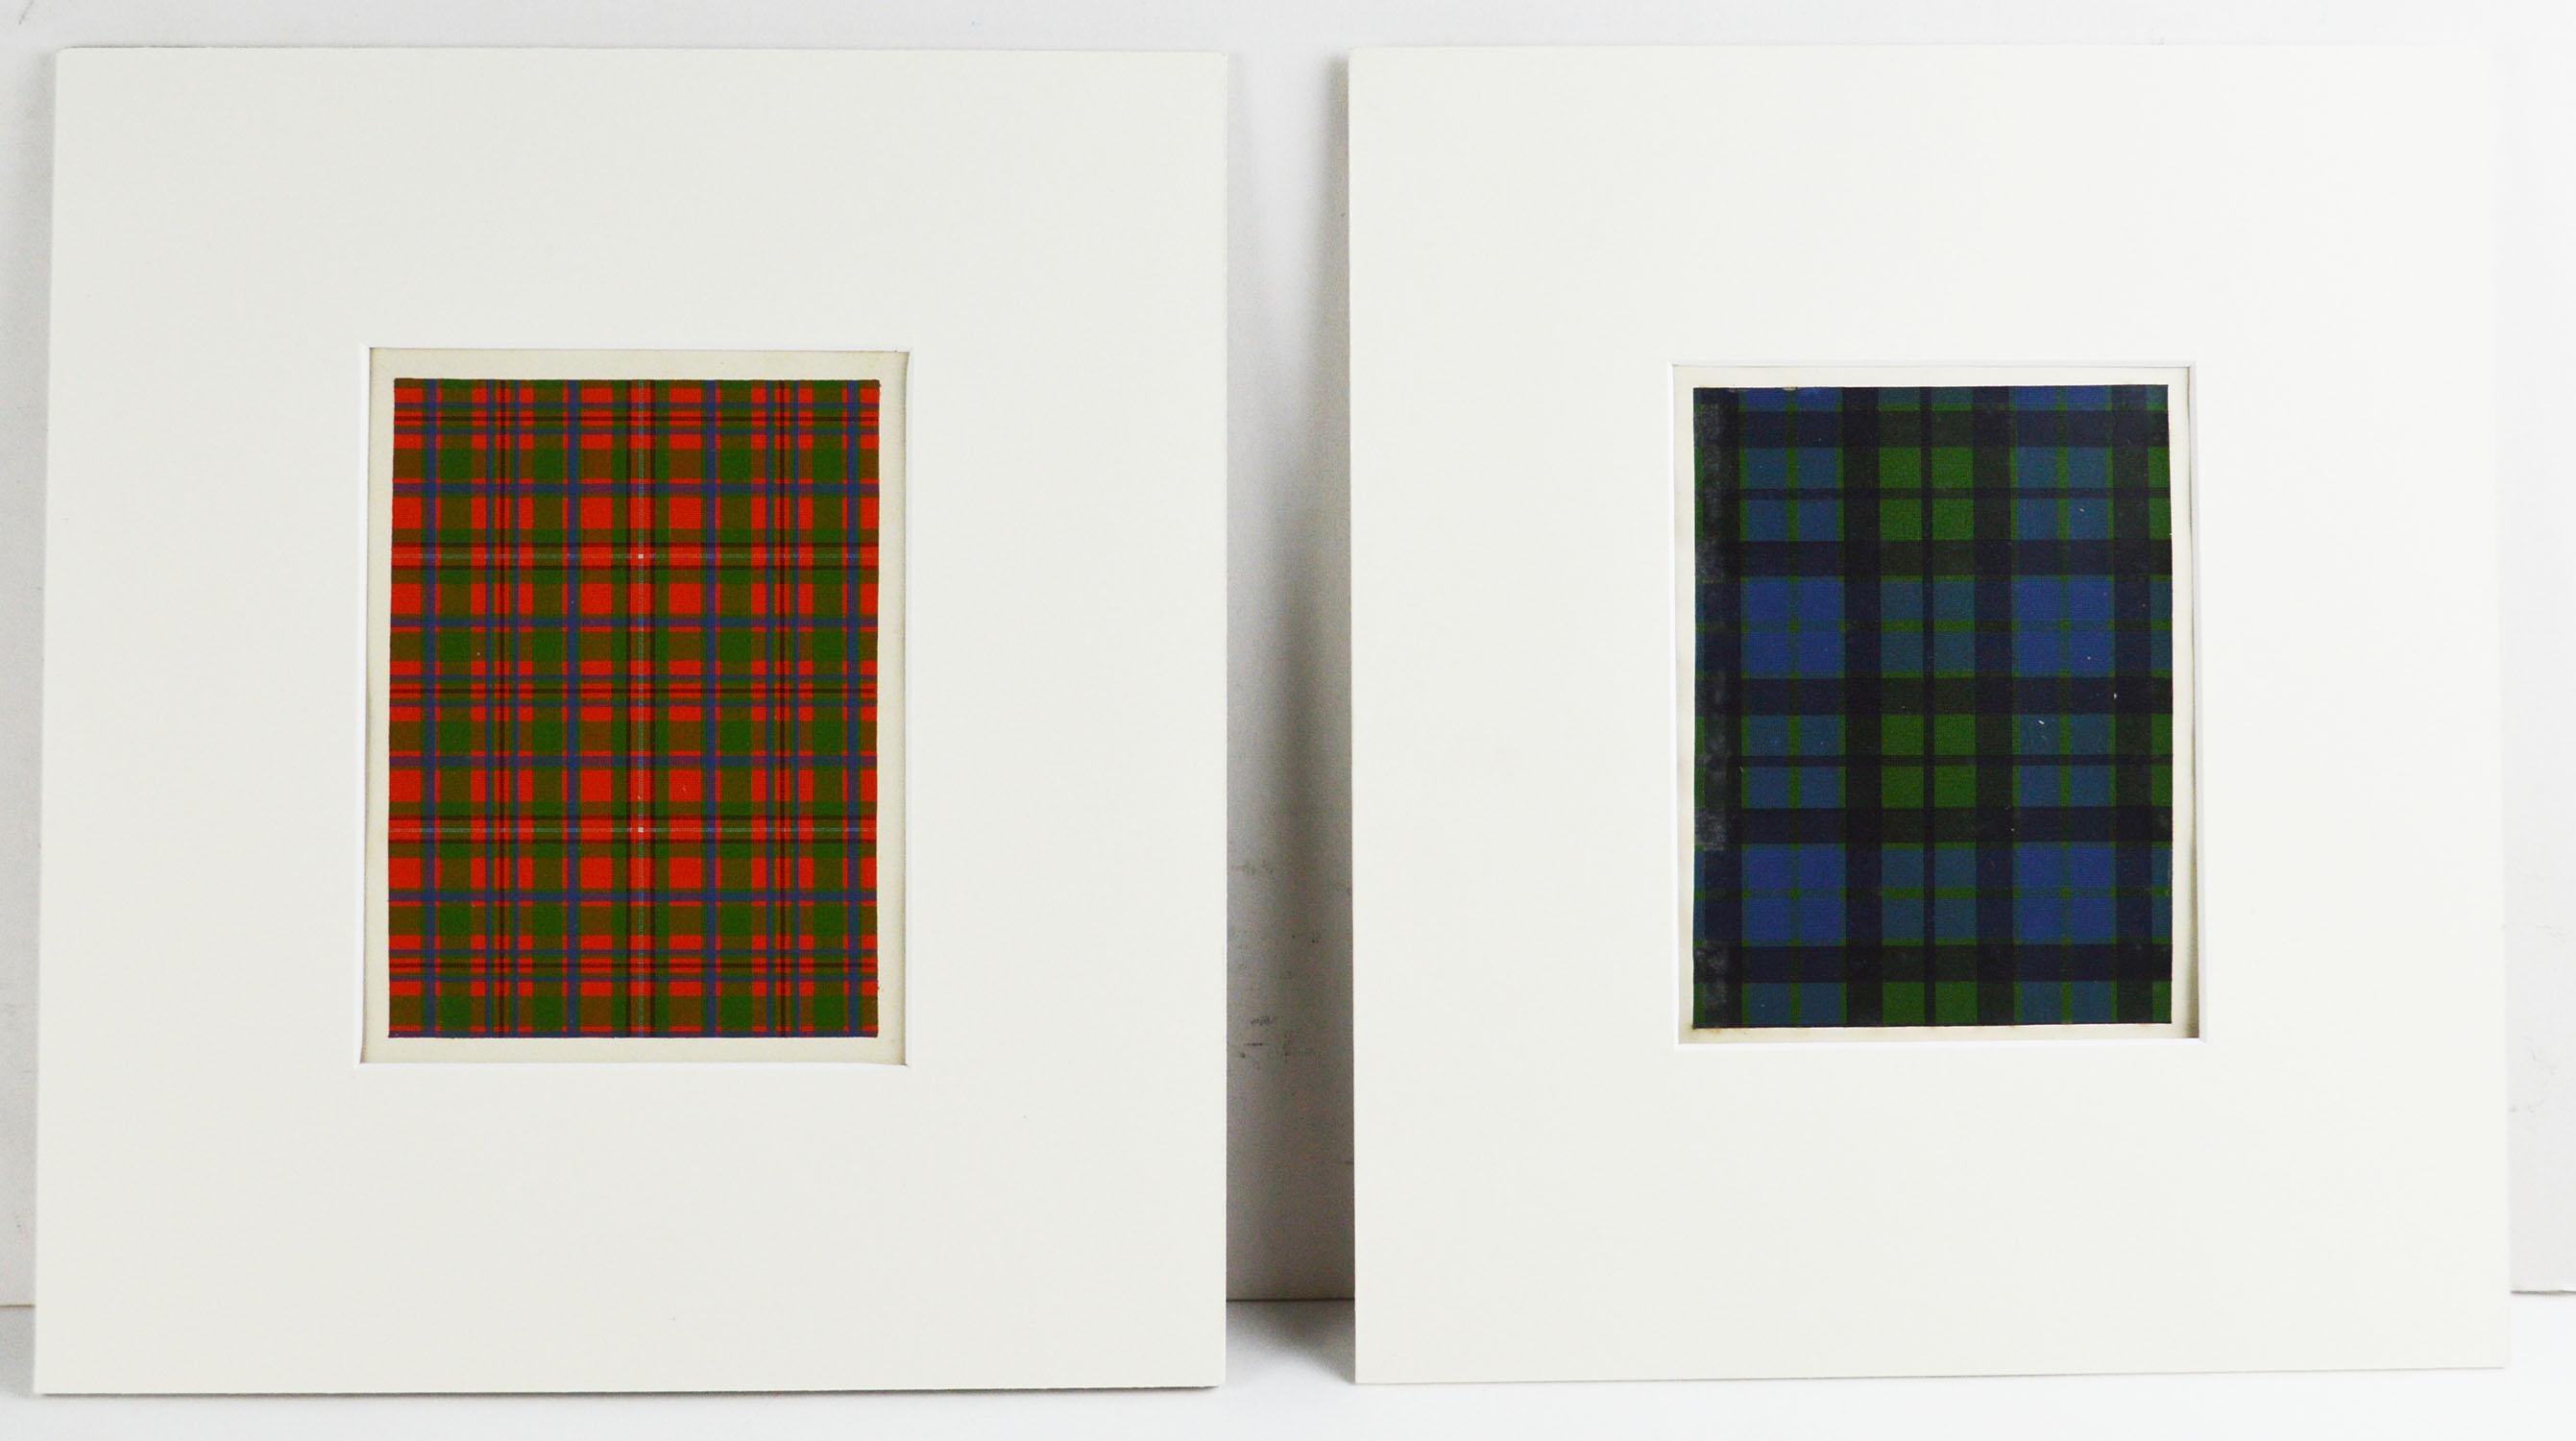 Lithographs on the finest of paper applied to card.

Similar technique to Mauchline ware where the tartan is applied to wood.

Published Edinburgh, Scotland, circa 1860.

The print is mounted or matted on ivory colored card

The measurement